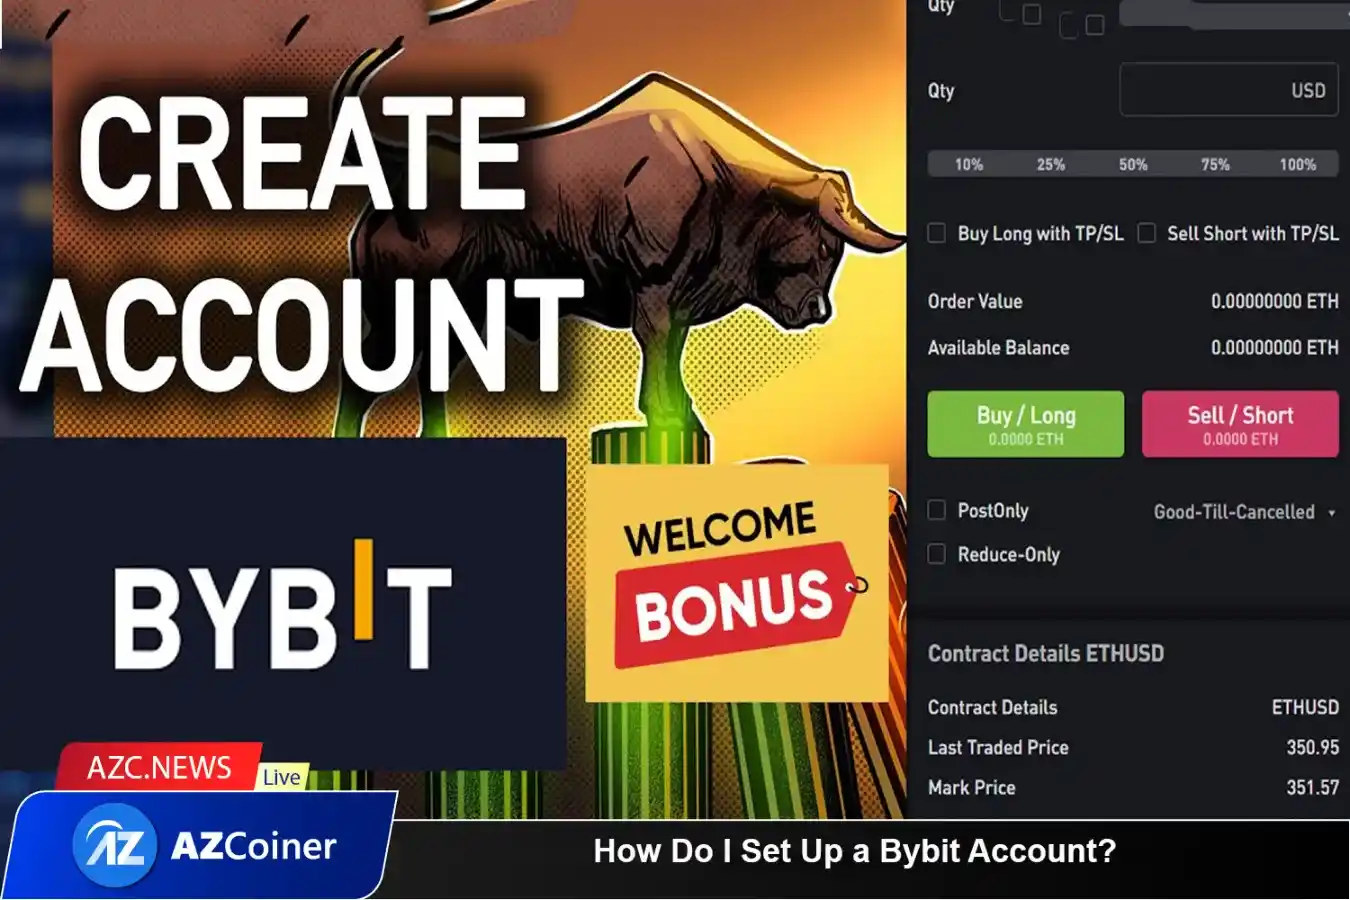 What Do I Need To Open A Bybit Account?_65d5d142227ab.webp